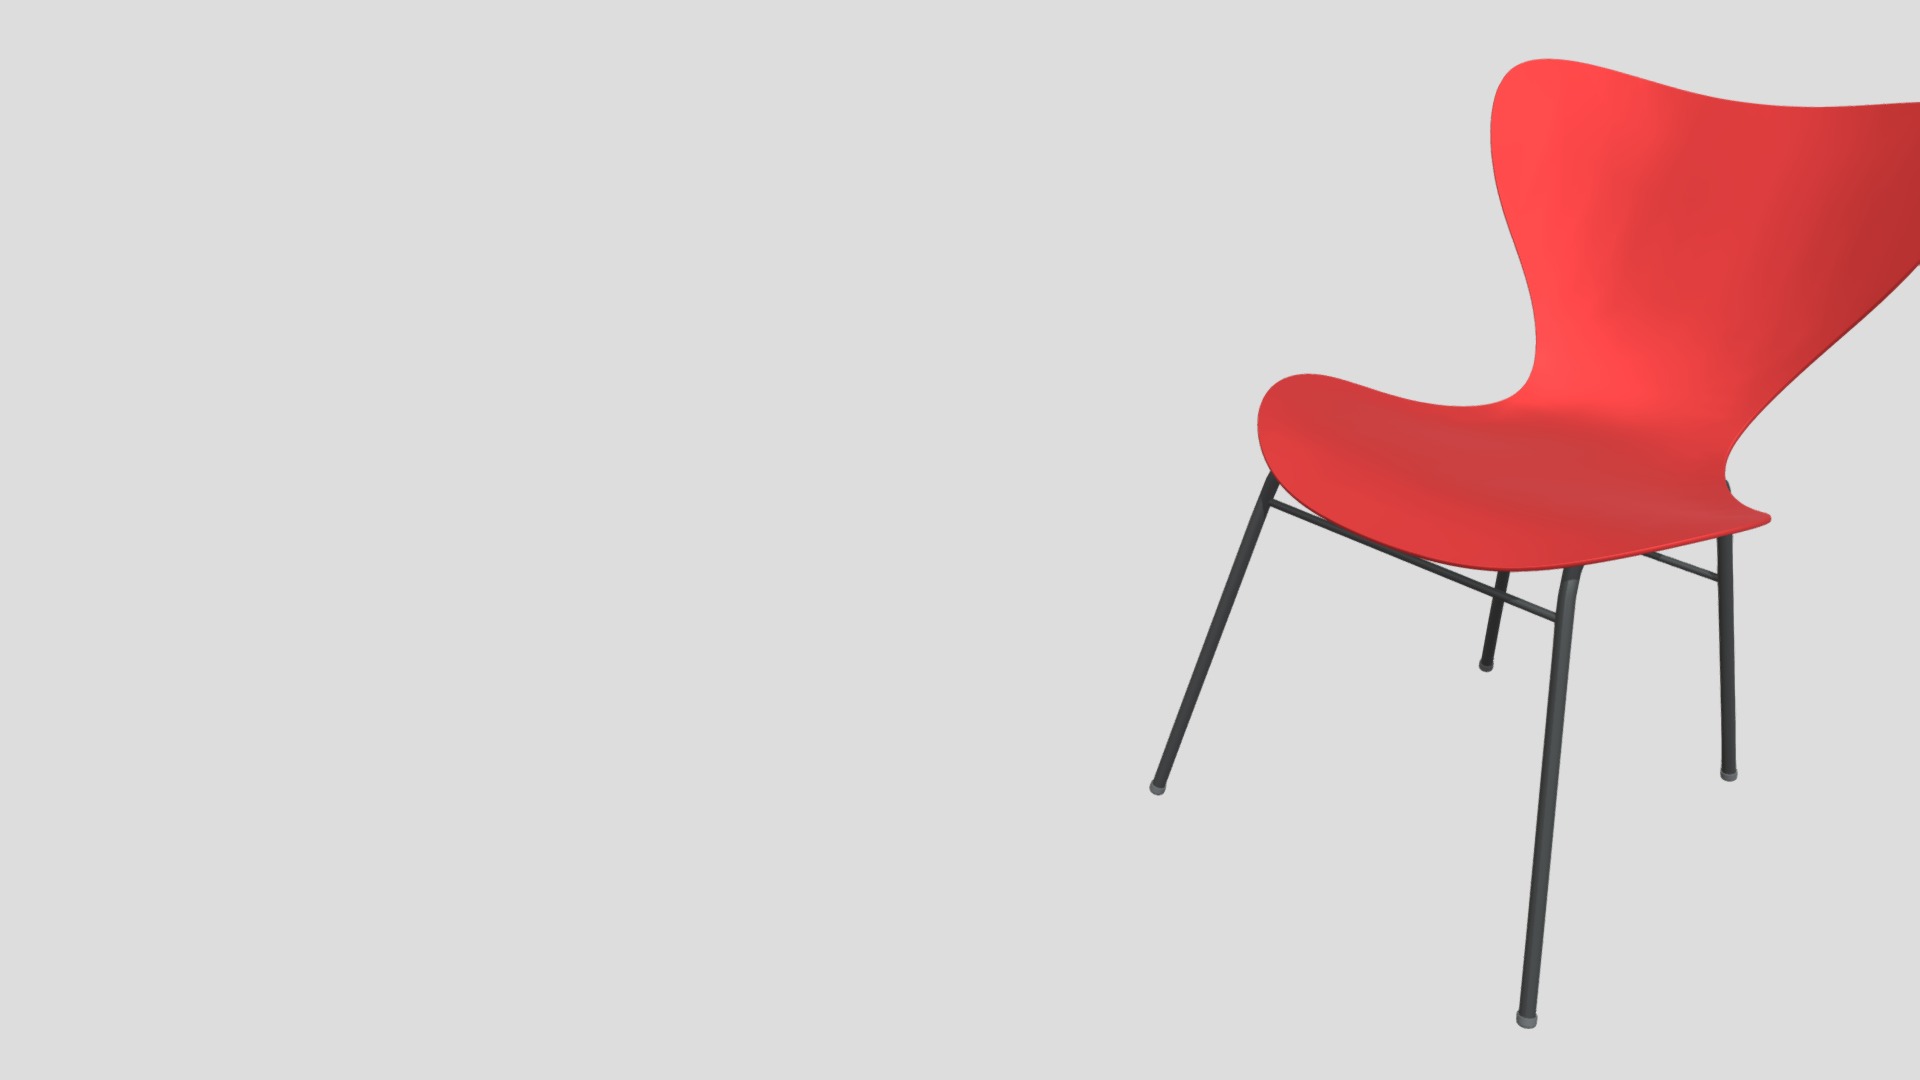 3D model Chair 1 - This is a 3D model of the Chair 1. The 3D model is about a red chair with a black back.